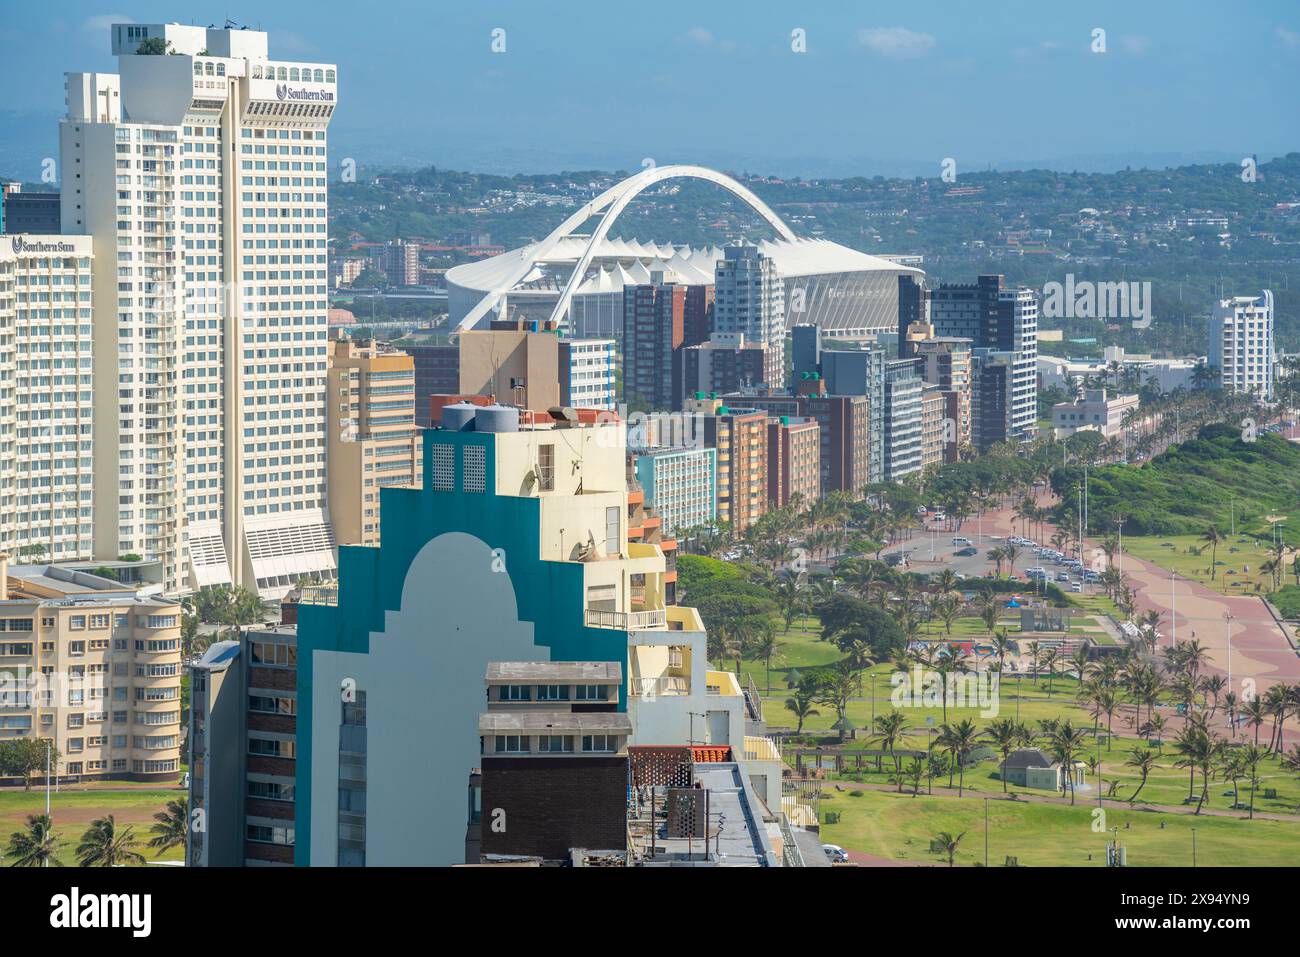 Elevated view of Moses Mabhida Stadium and hotels, Durban, KwaZulu-Natal Province, South Africa, Africa Stock Photo